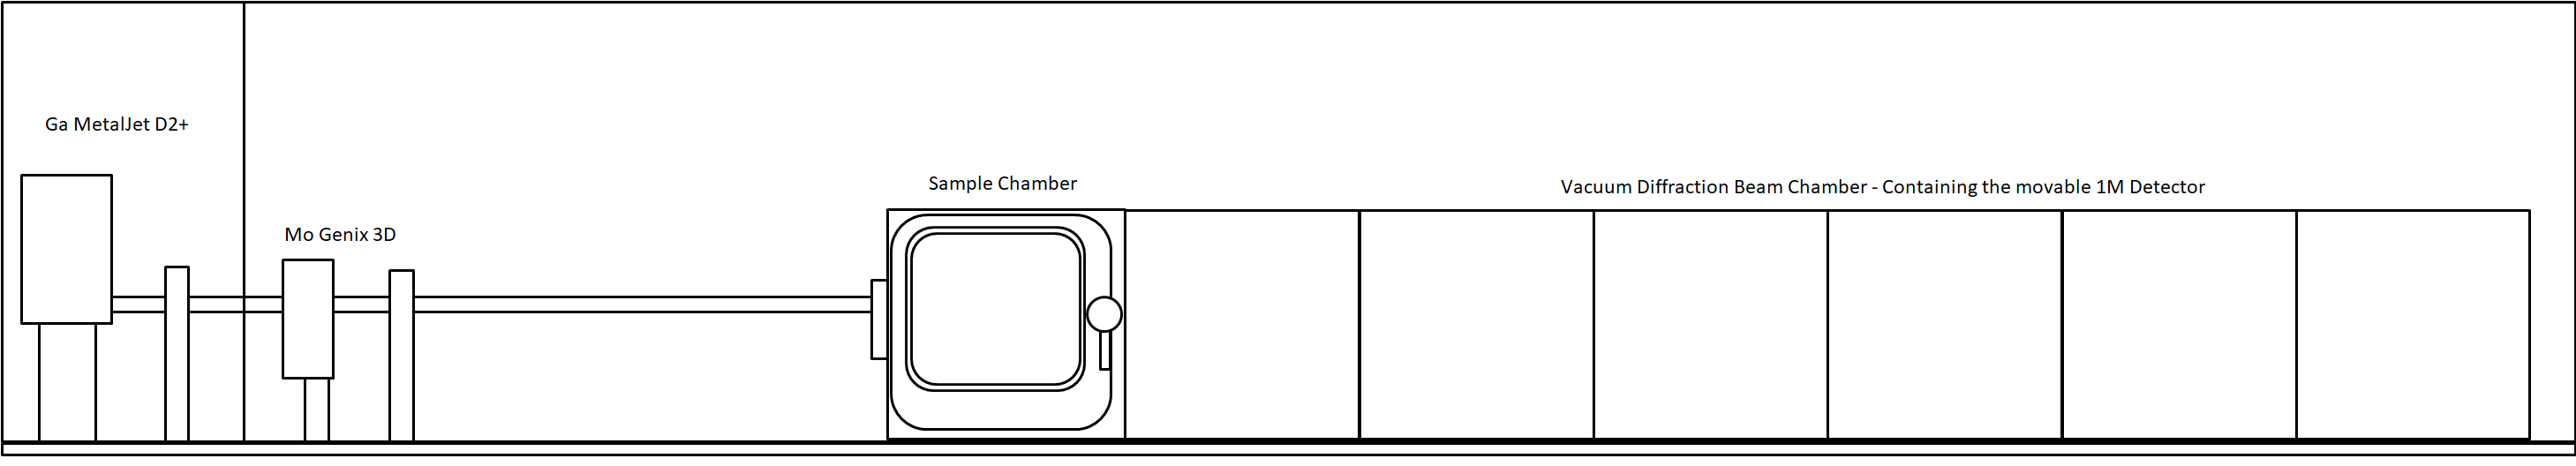 Simple scheme showing the sources, sample chamber and moveable 1M detector chamber.